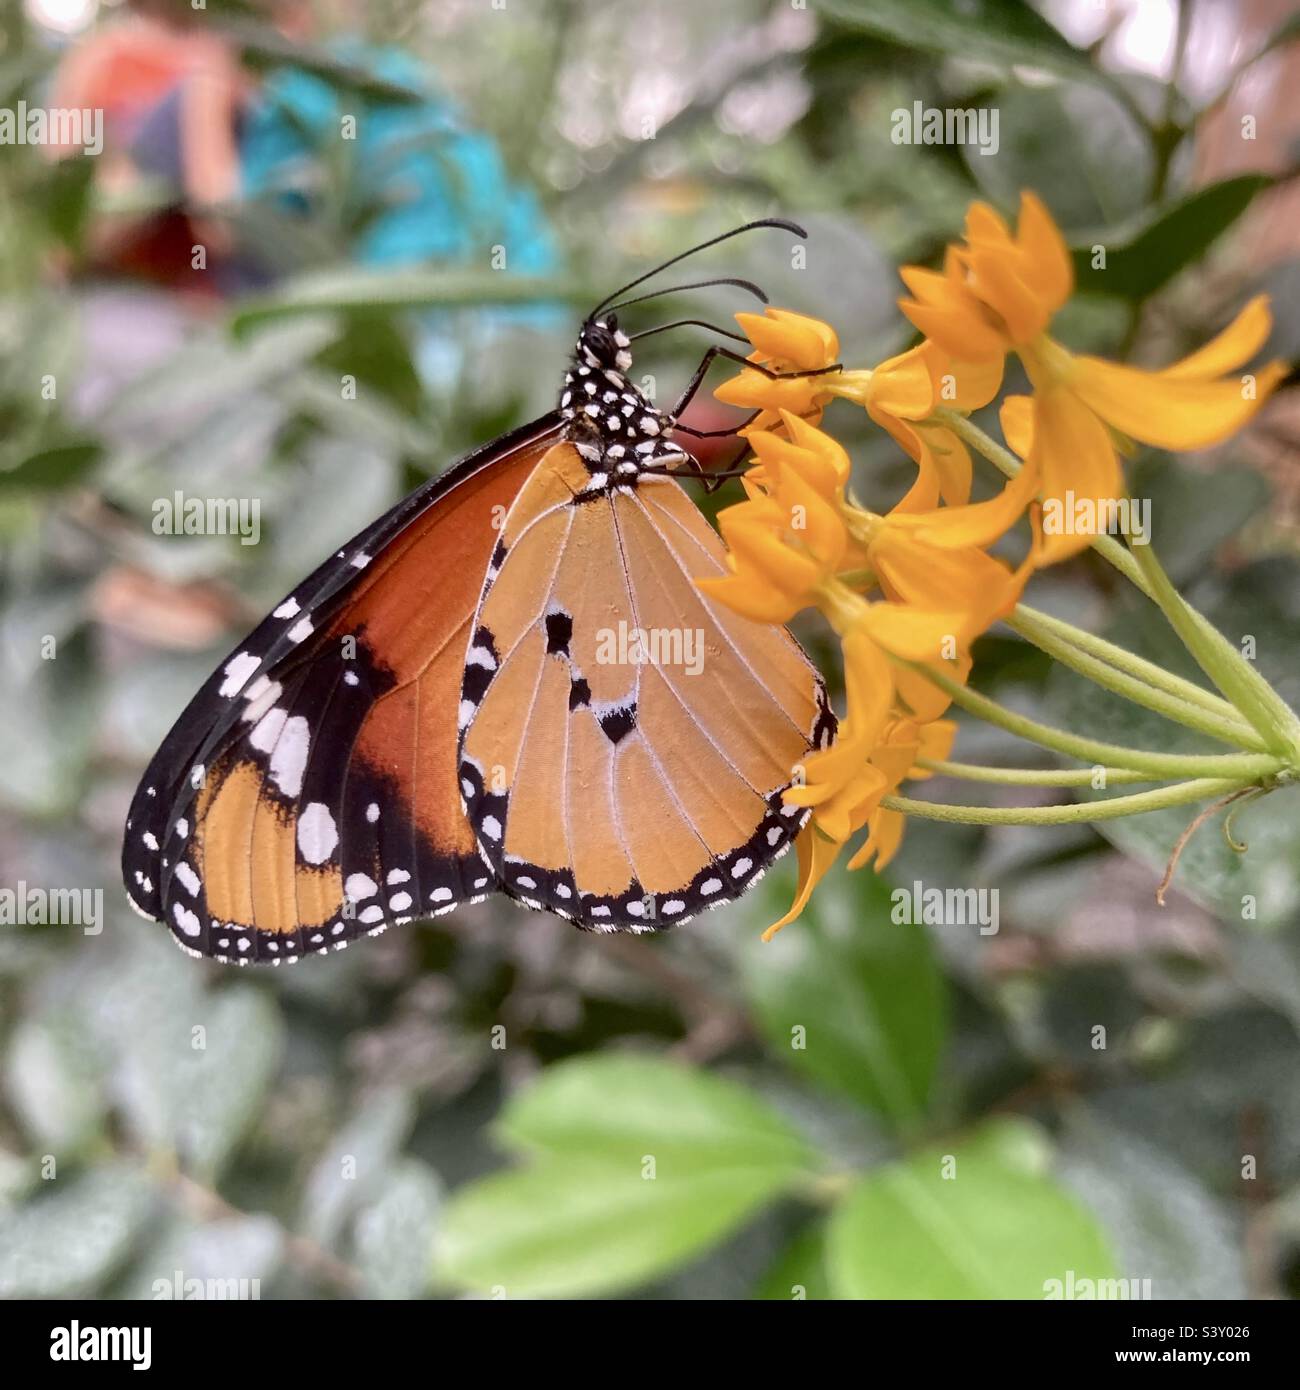 Plain tiger butterfly drinking nectar from milkweed flowers Stock Photo